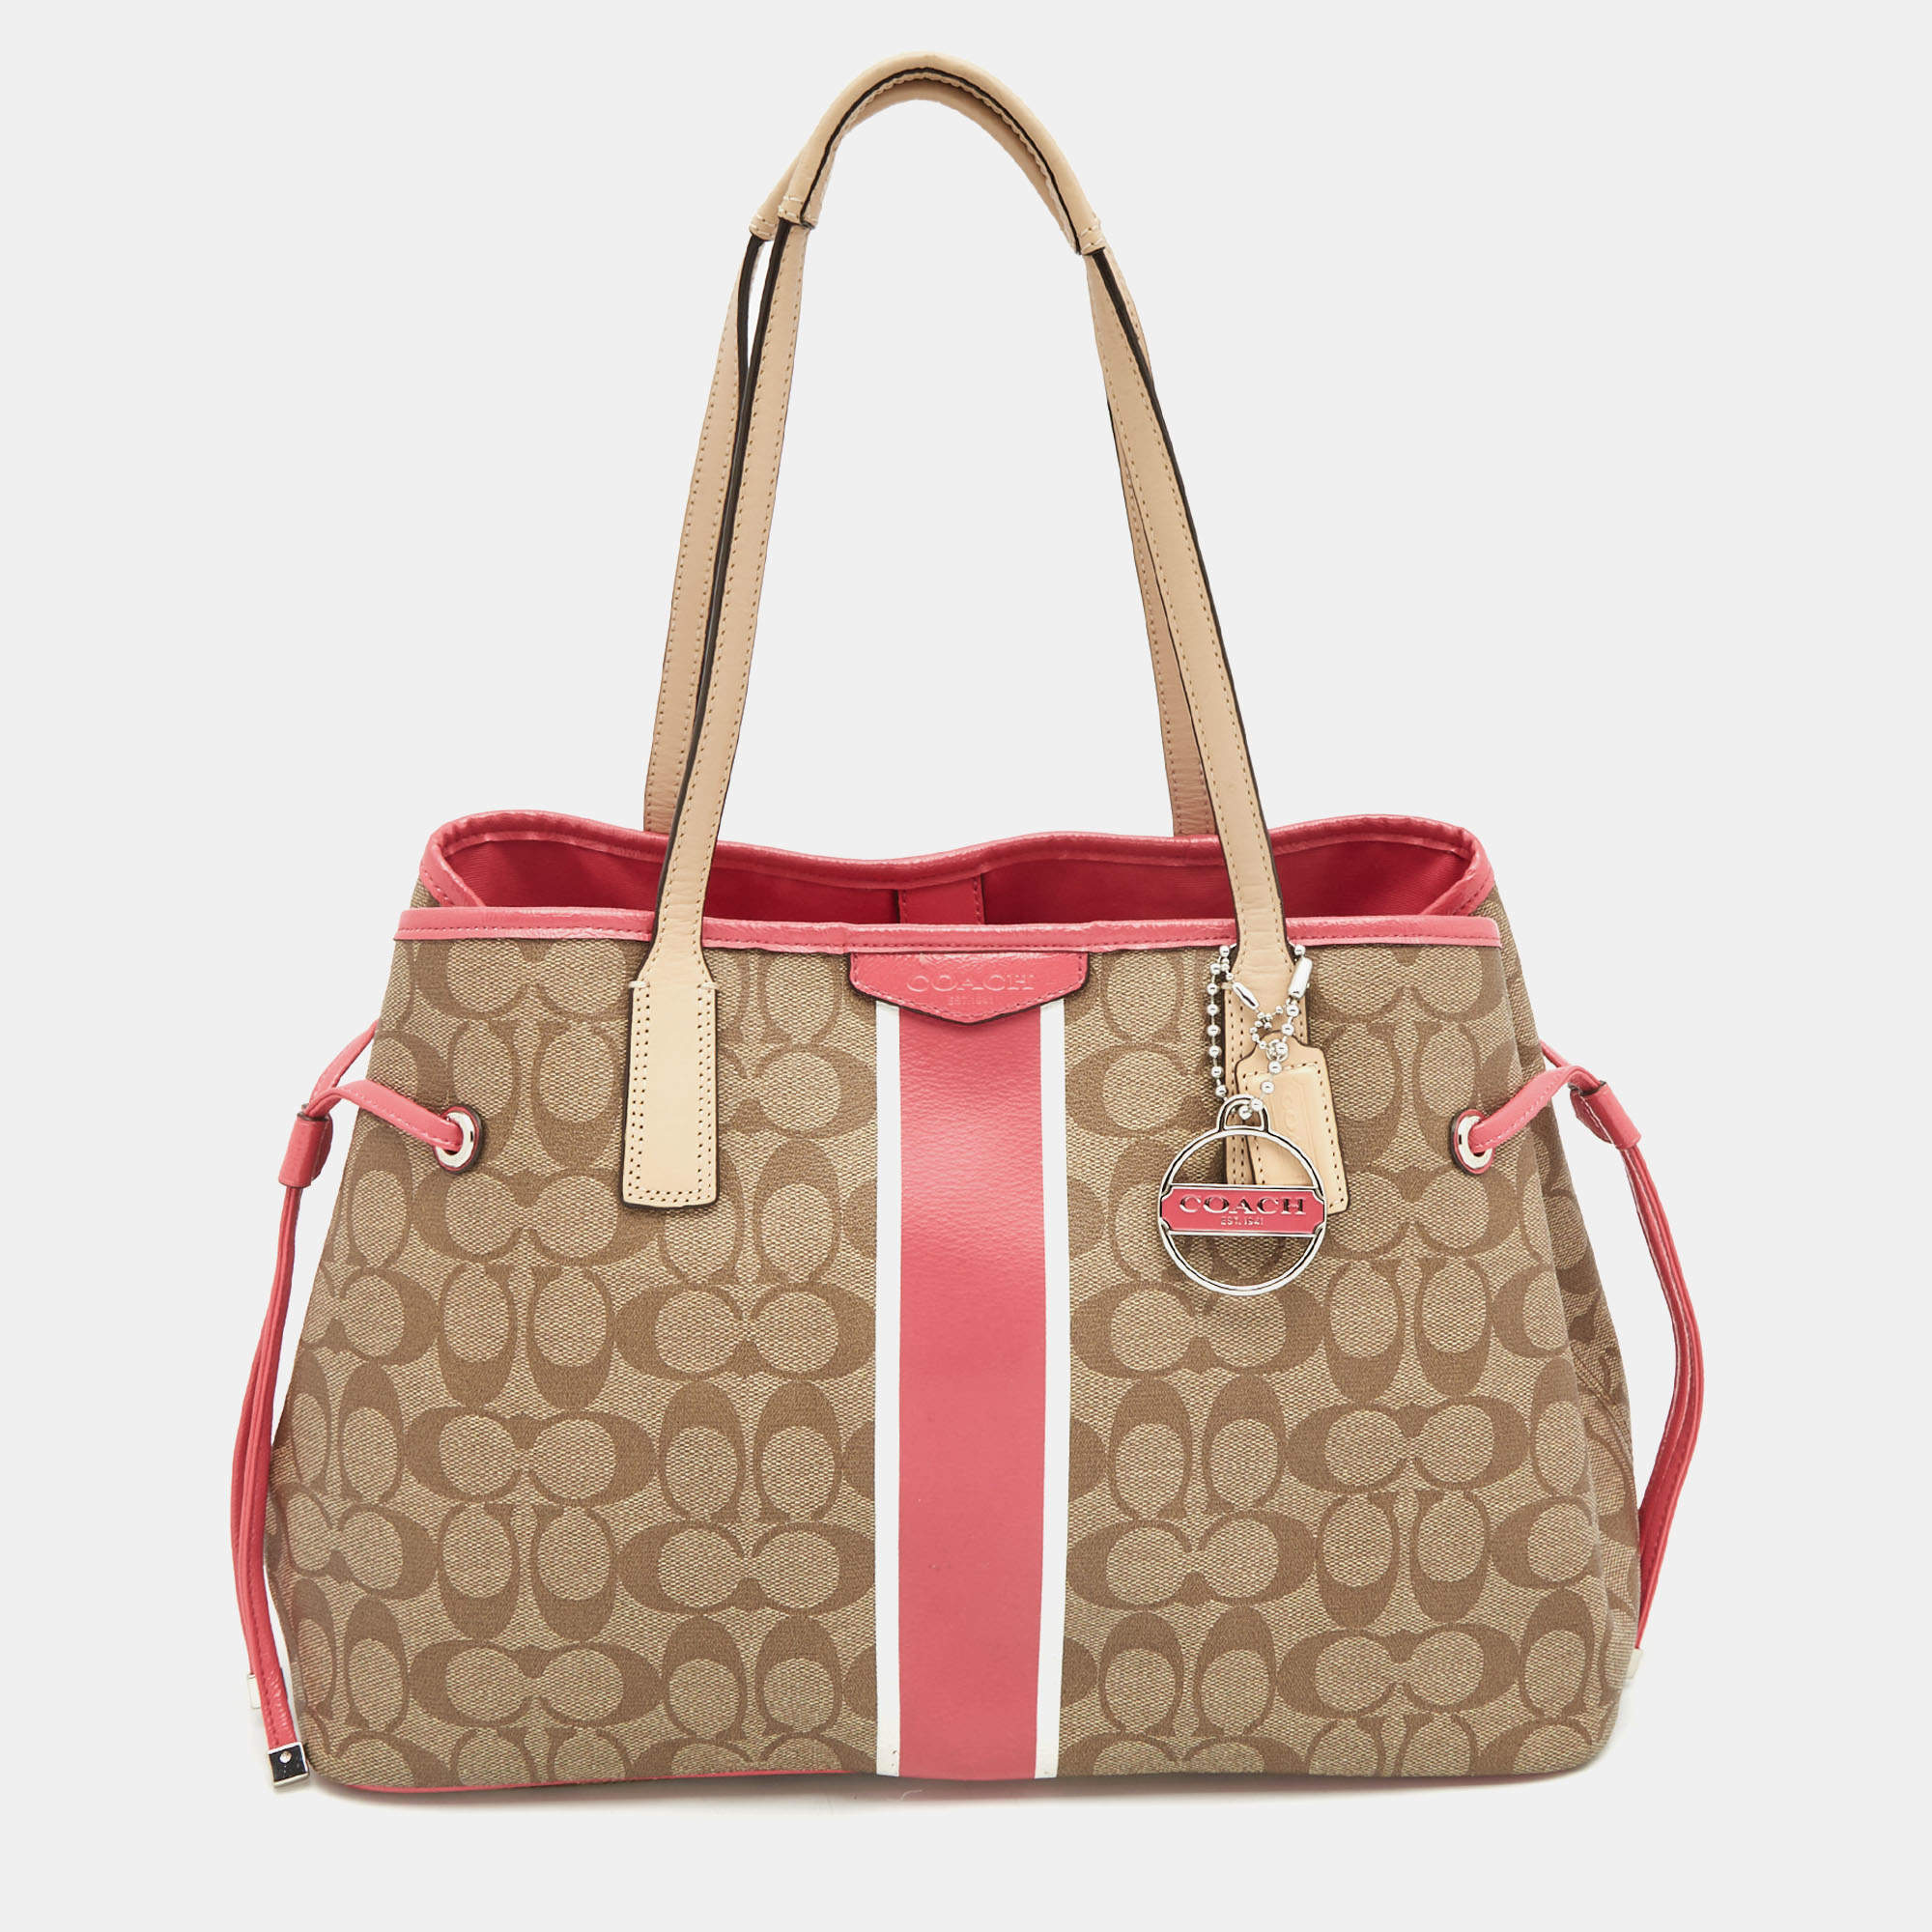 Coach, Bags, Authentic Coach Speedy Tote Pink Bag Purse